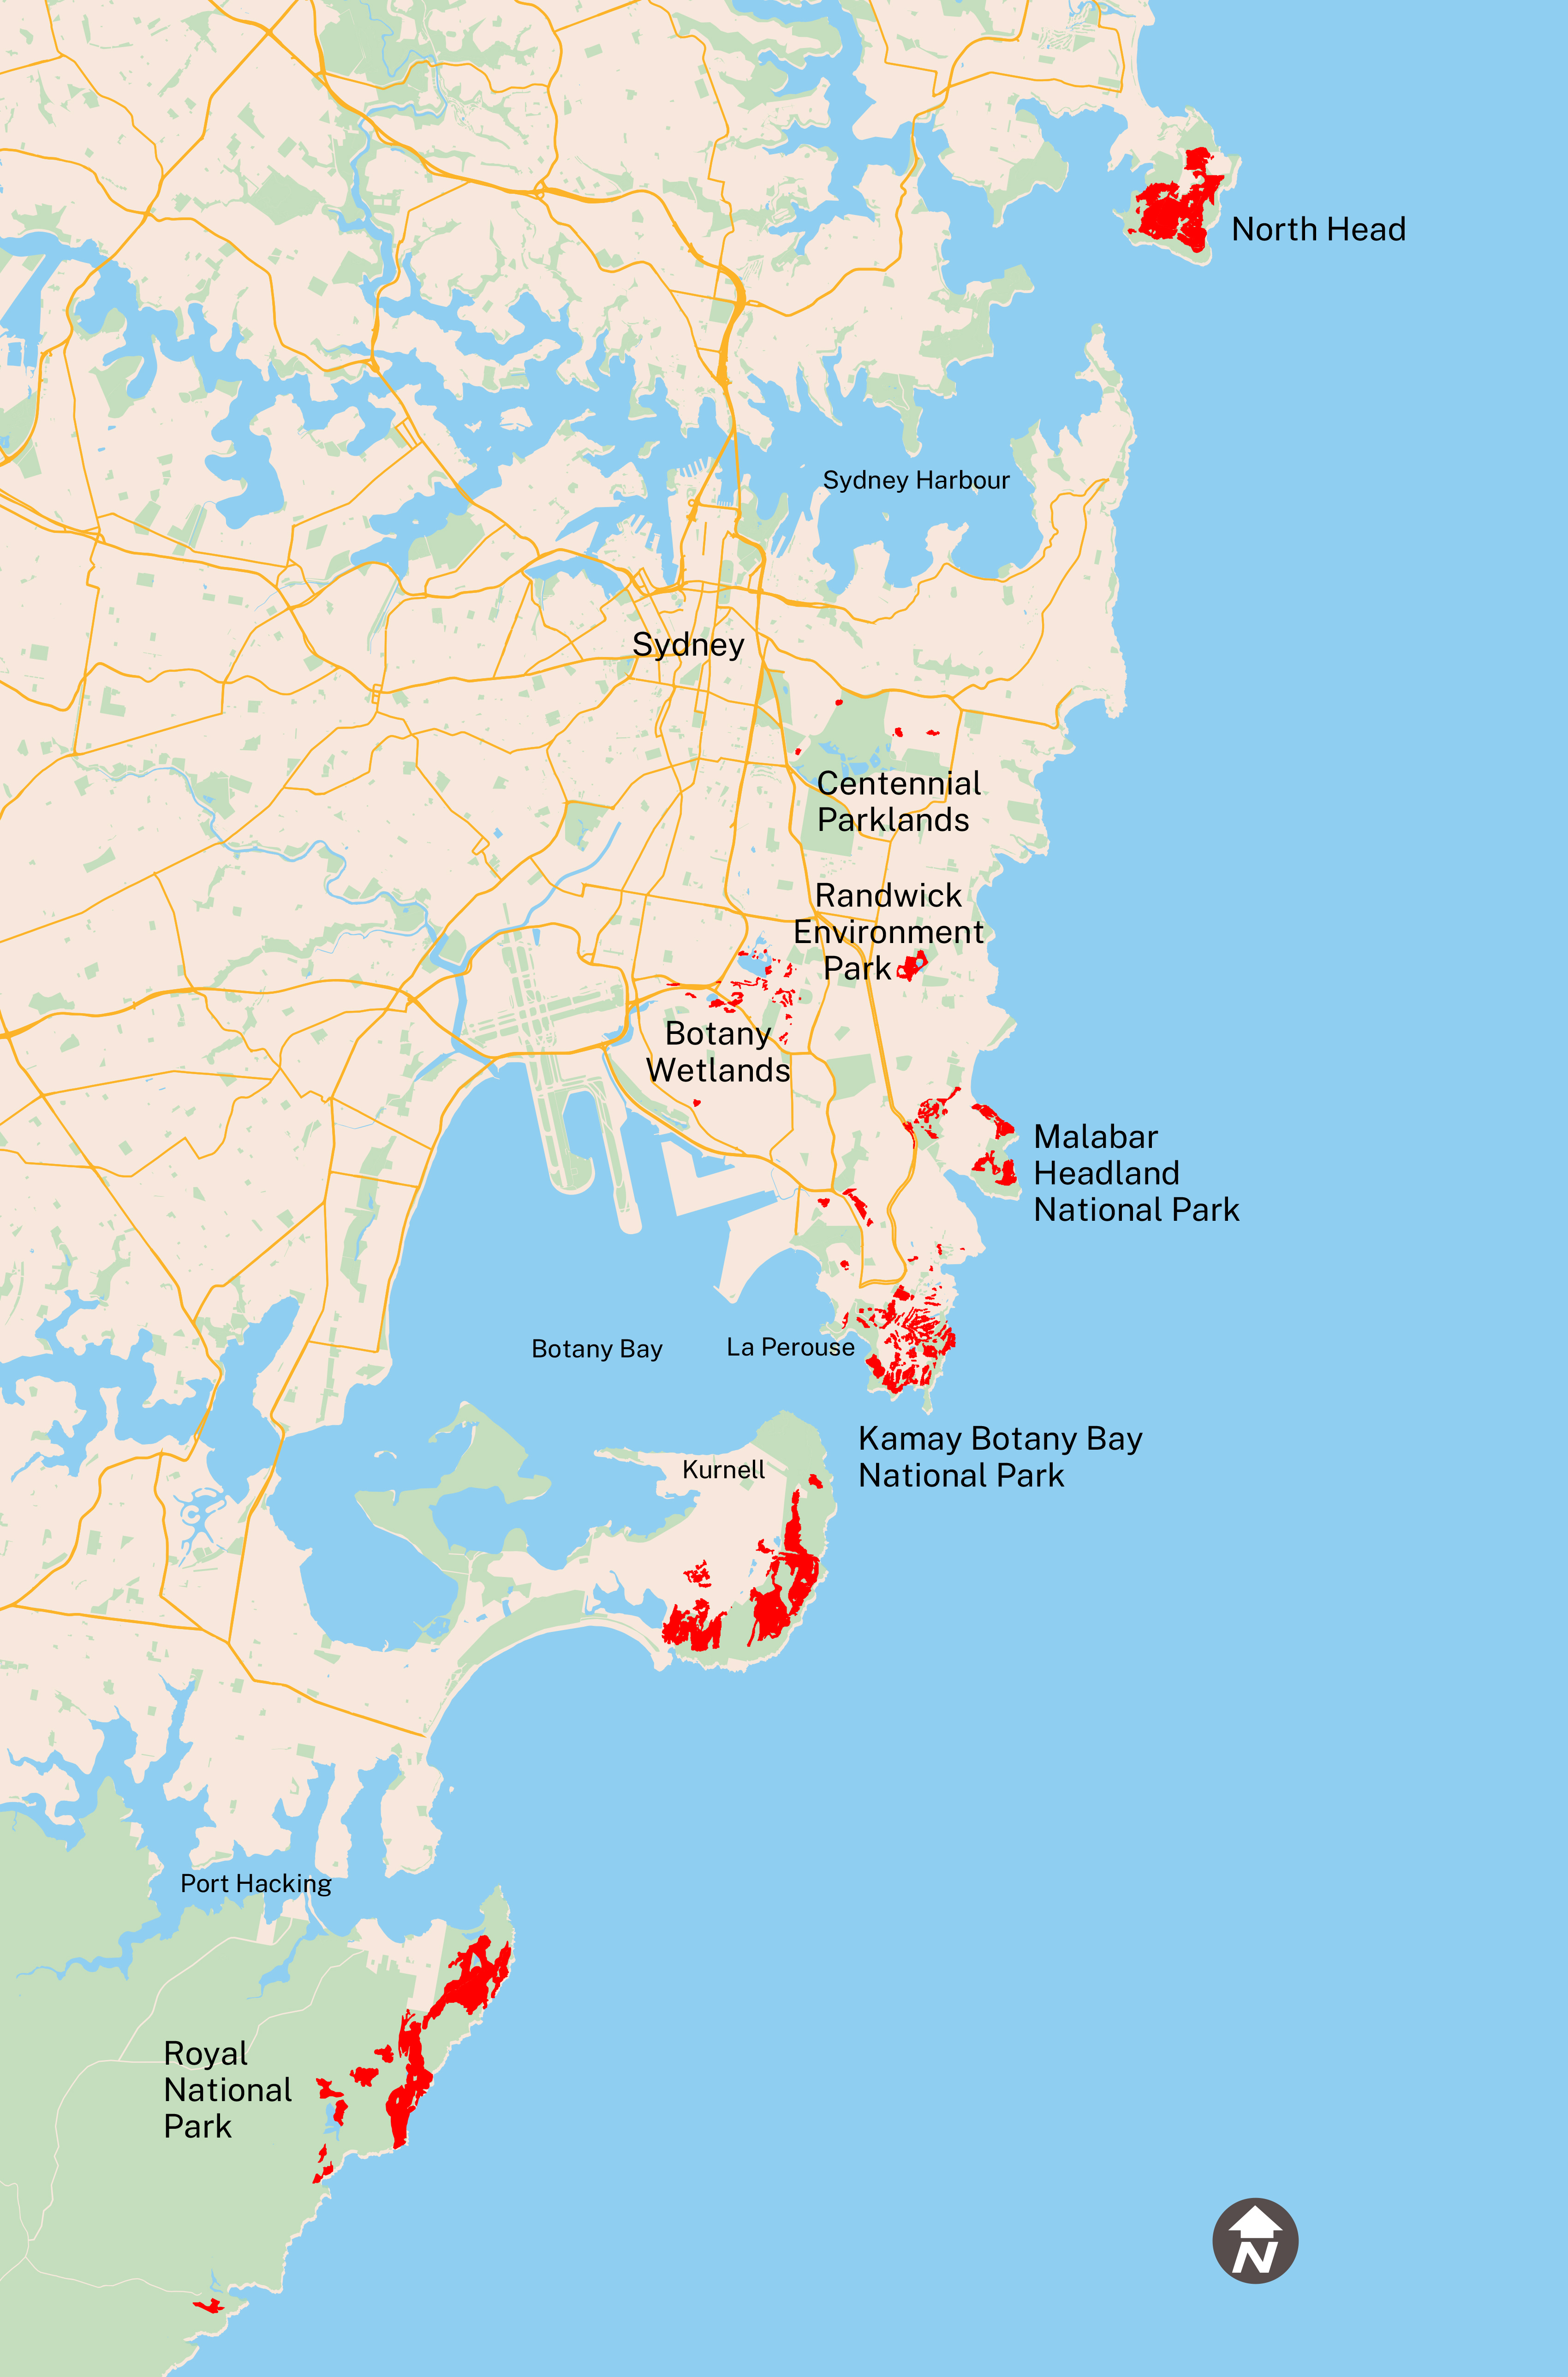 Map showing Eastern Suburbs banksia scrub remnants indicated in red in 2021, from Royal National Park to Manly, NSW.